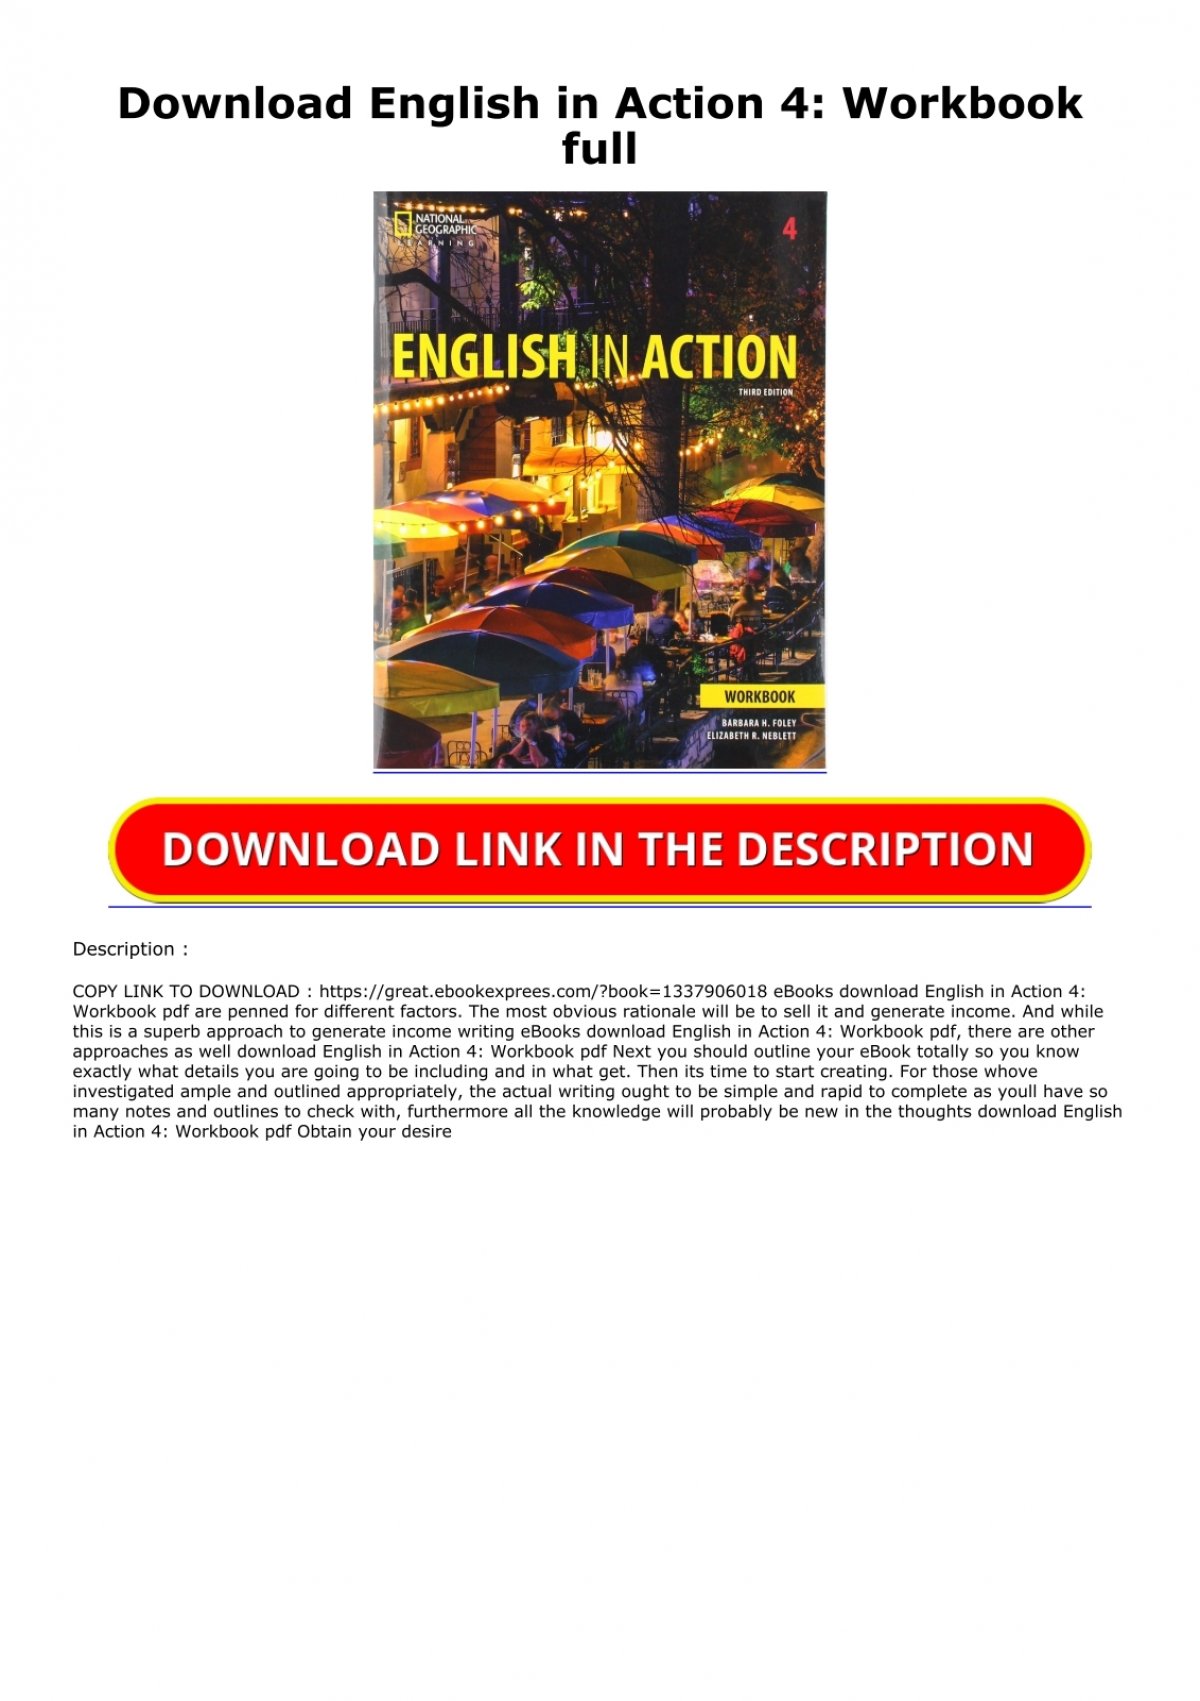 download-english-in-action-4-workbook-full